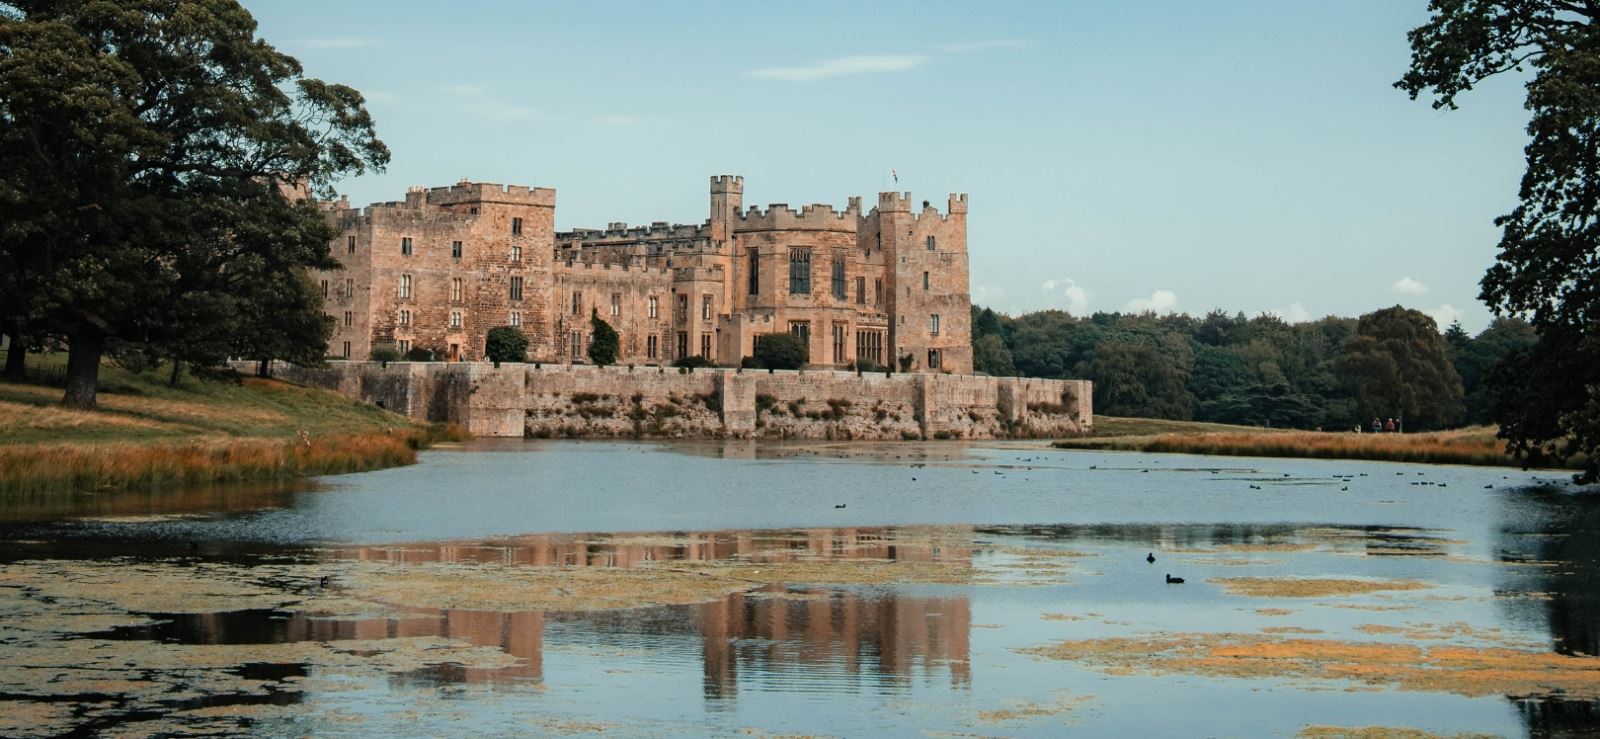 Raby Castle and lake